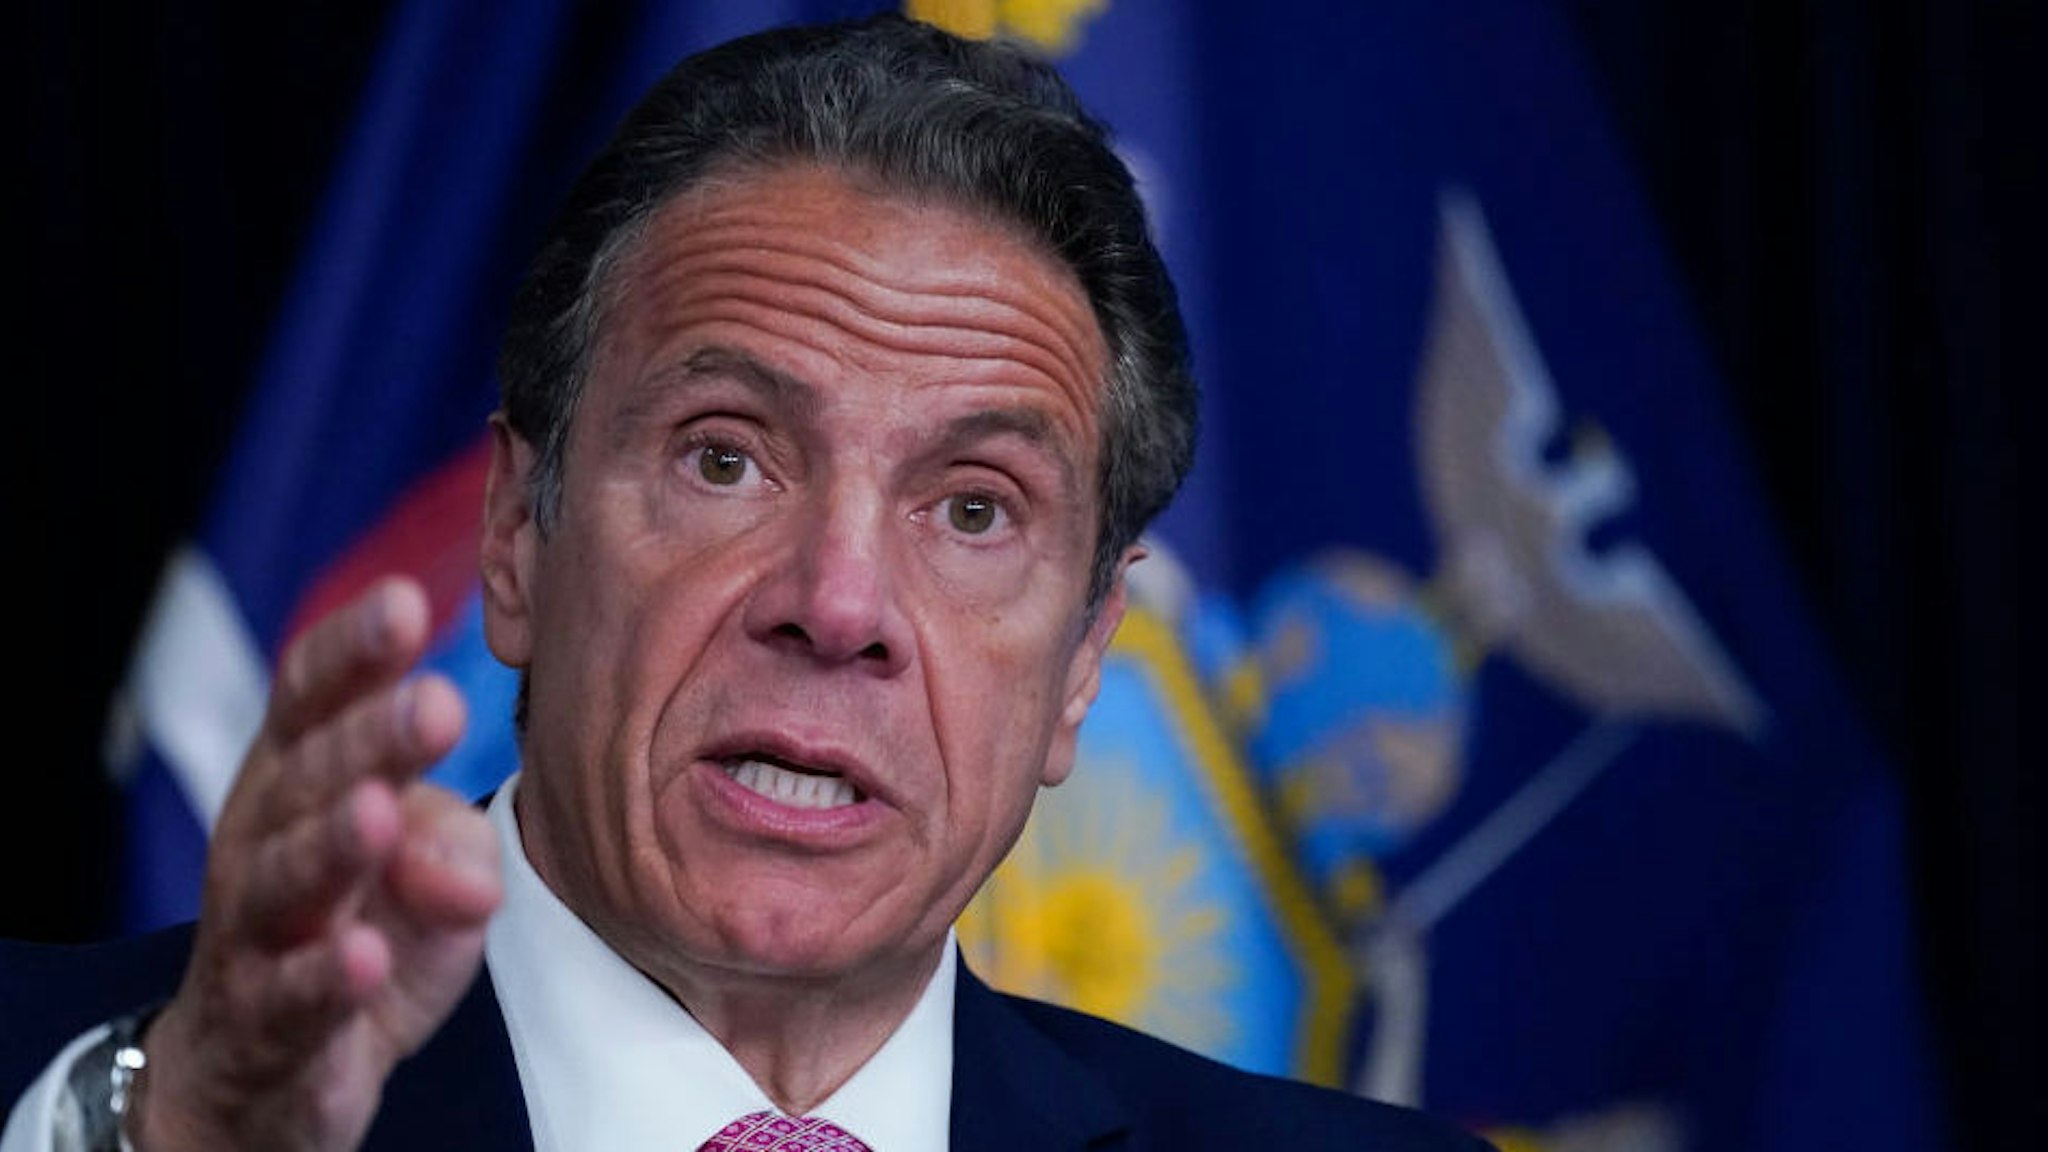 NEW YORK, NEW YORK - MAY 10: New York Gov. Andrew Cuomo speaks during a news conference on May 10, 2021 in New York City. It was announced that both SUNY and CUNY will require students to get COVID-19 vaccines before the next academic year.